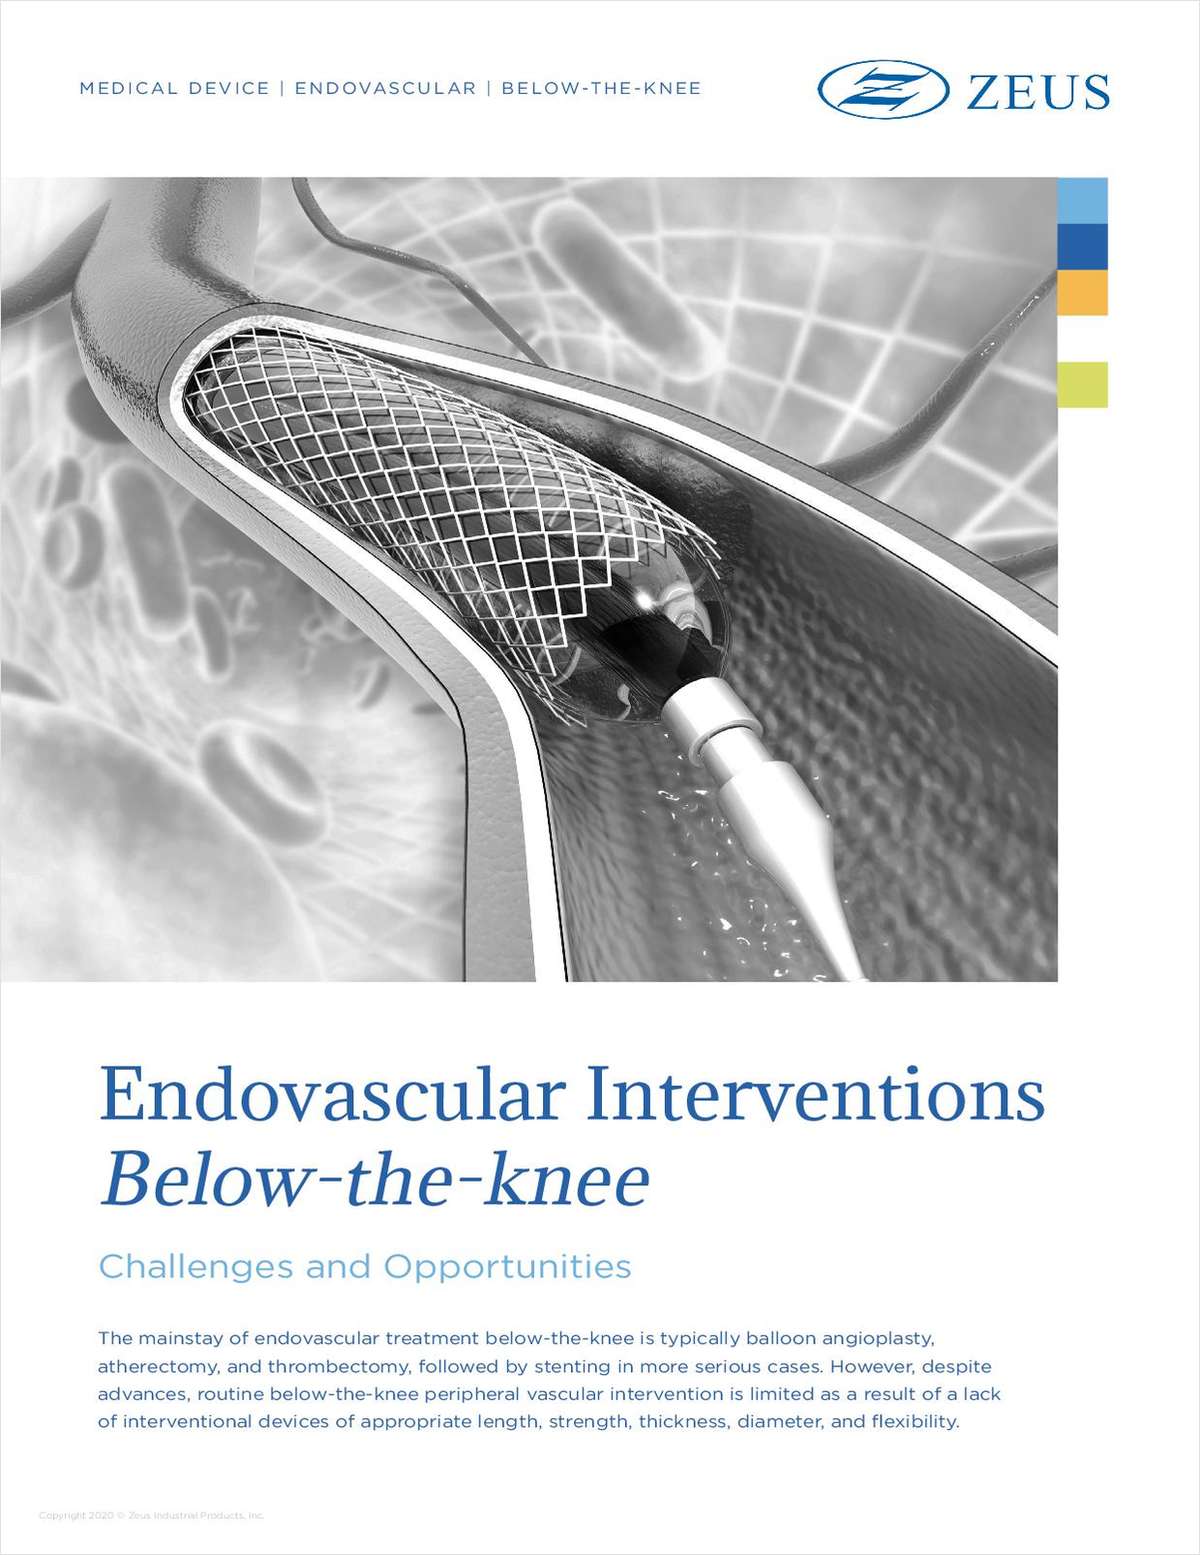 Endovascular Interventions: Treating PAD Below the Knee